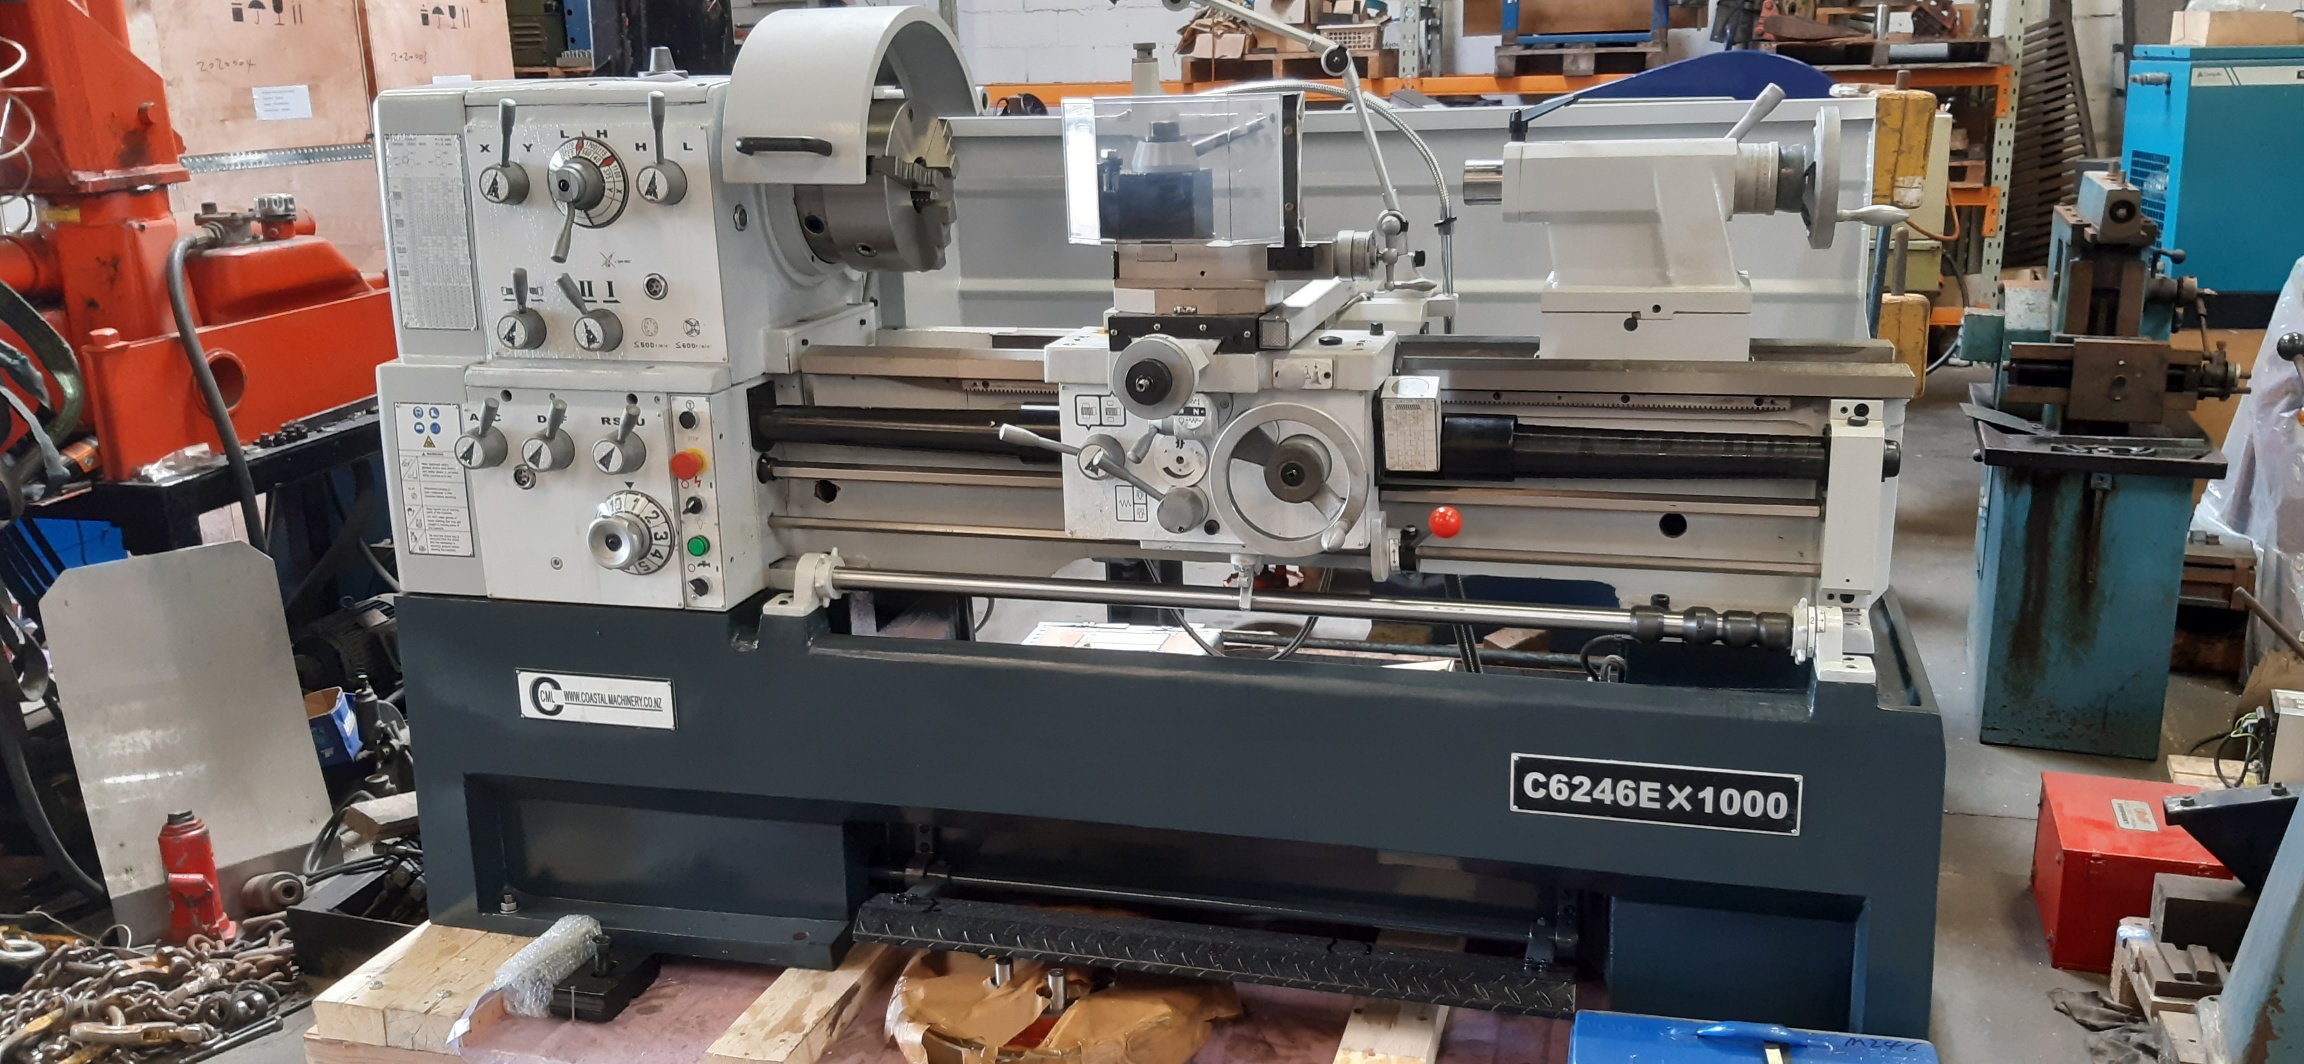 Lathe CML C6246/1000 3 phase (new) 80mm spindle, 1000 B/centres 460mm swing 